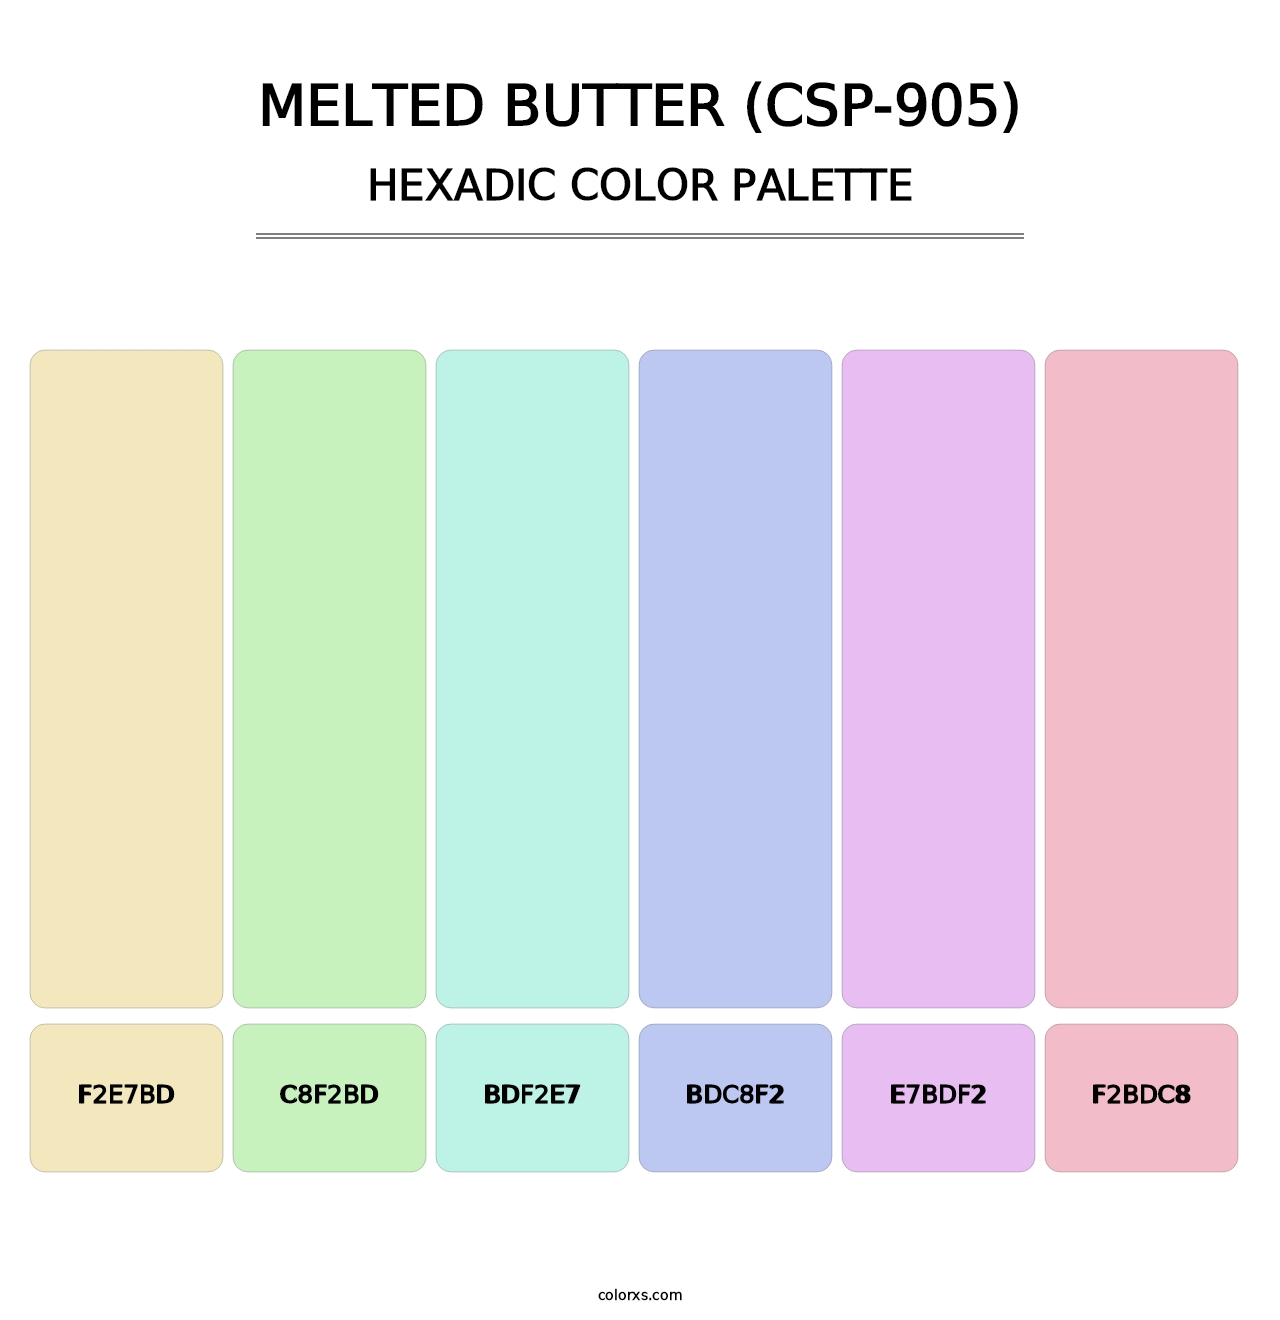 Melted Butter (CSP-905) - Hexadic Color Palette